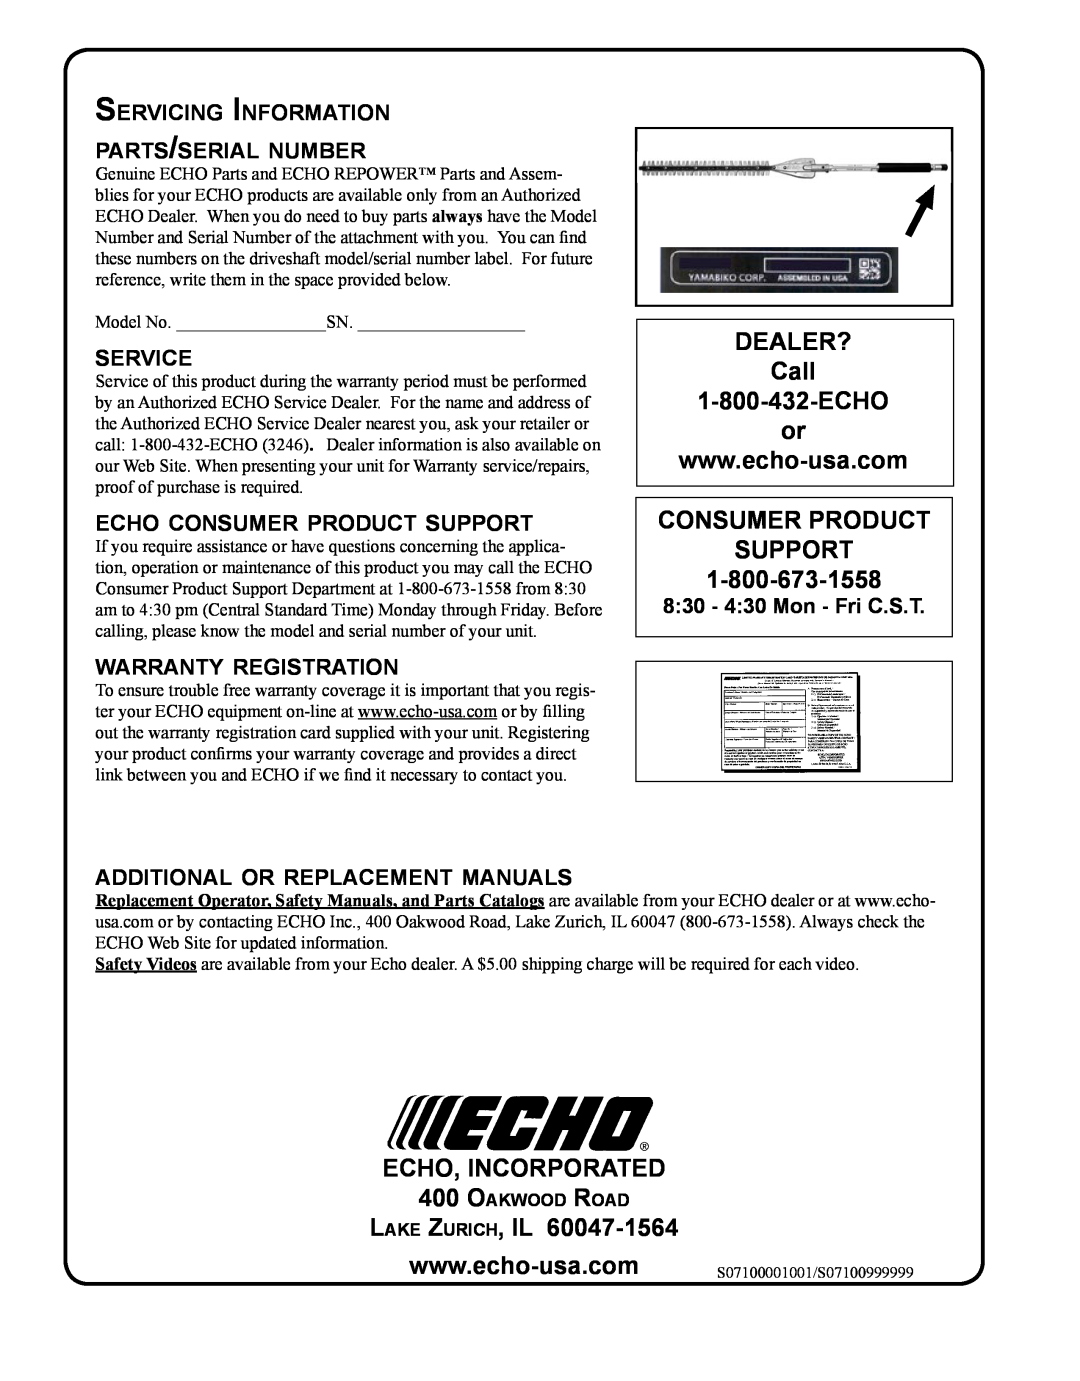 Echo 99944200485 DEALER? Call 1-800-432-ECHO or, Consumer Product Support, Echo, Incorporated, Lake Zurich, IL, service 